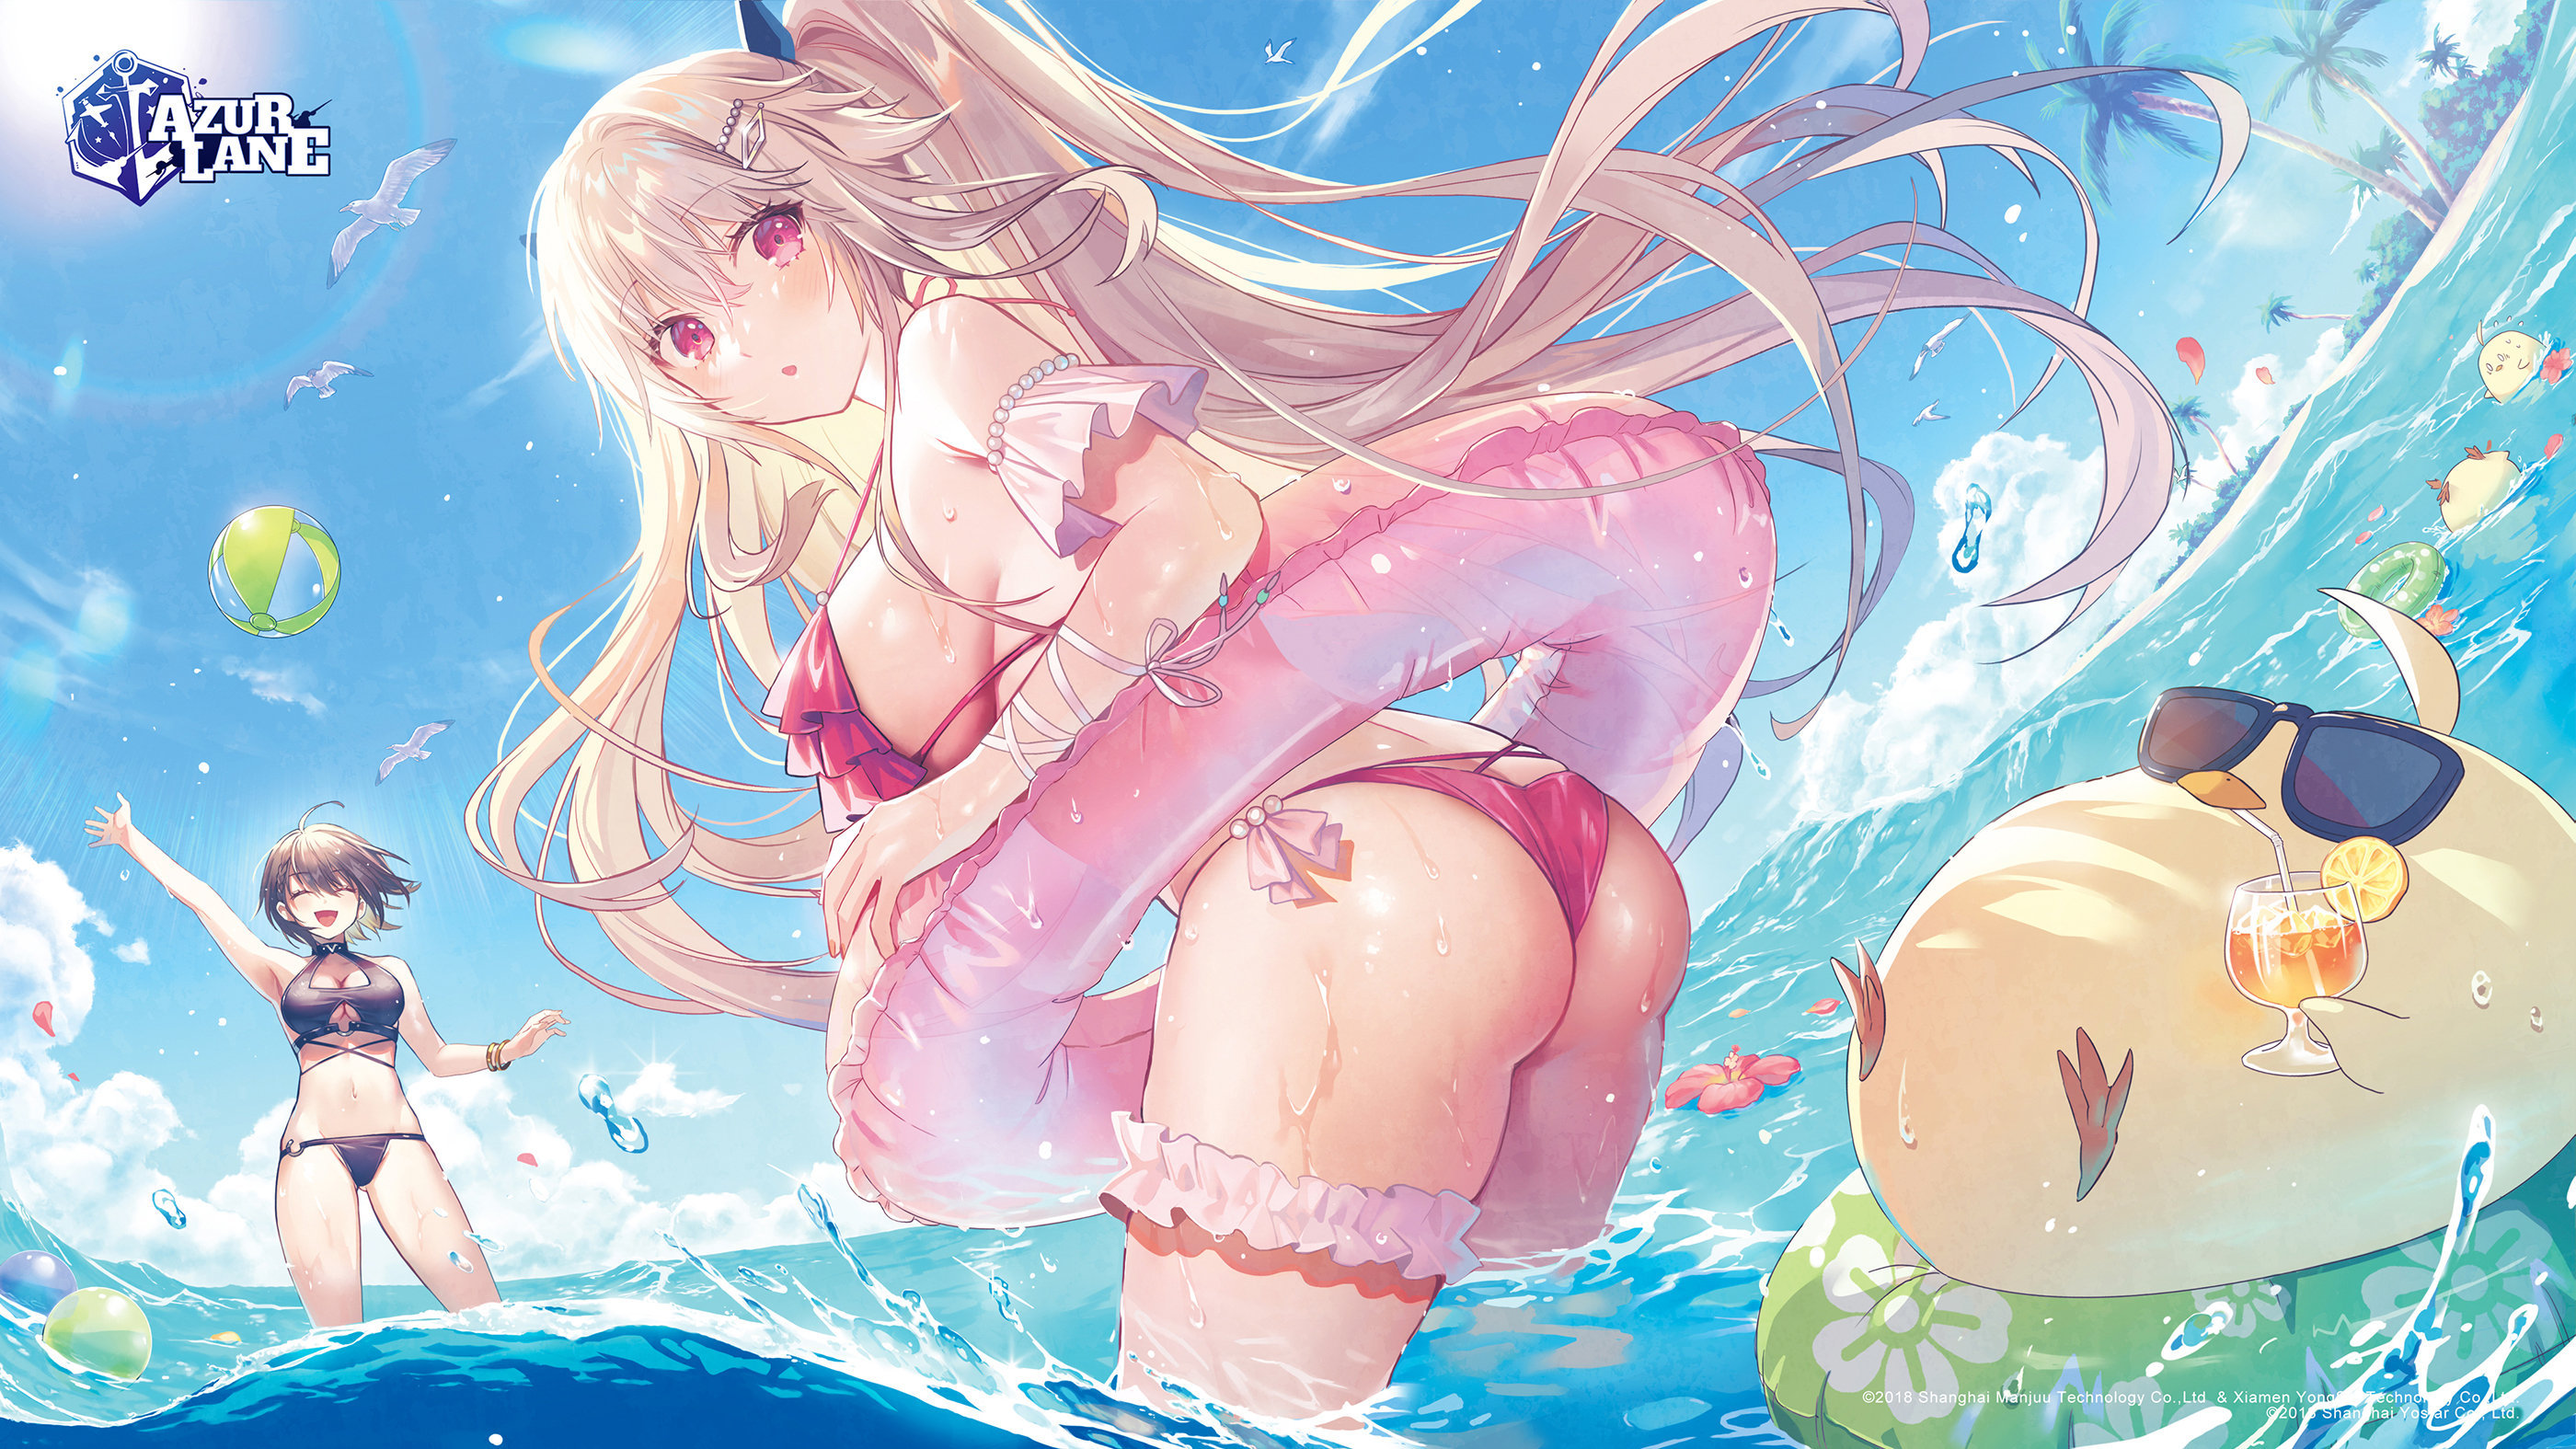 Anime 2800x1575 Anchorage (Azur Lane) Azur Lane Baltimore (Azur Lane) ass in water water clouds sky thighs bikini slime anime girls floater beach standing in water palm trees birds looking back sideboob petals water drops cocktails drink looking at viewer wet body